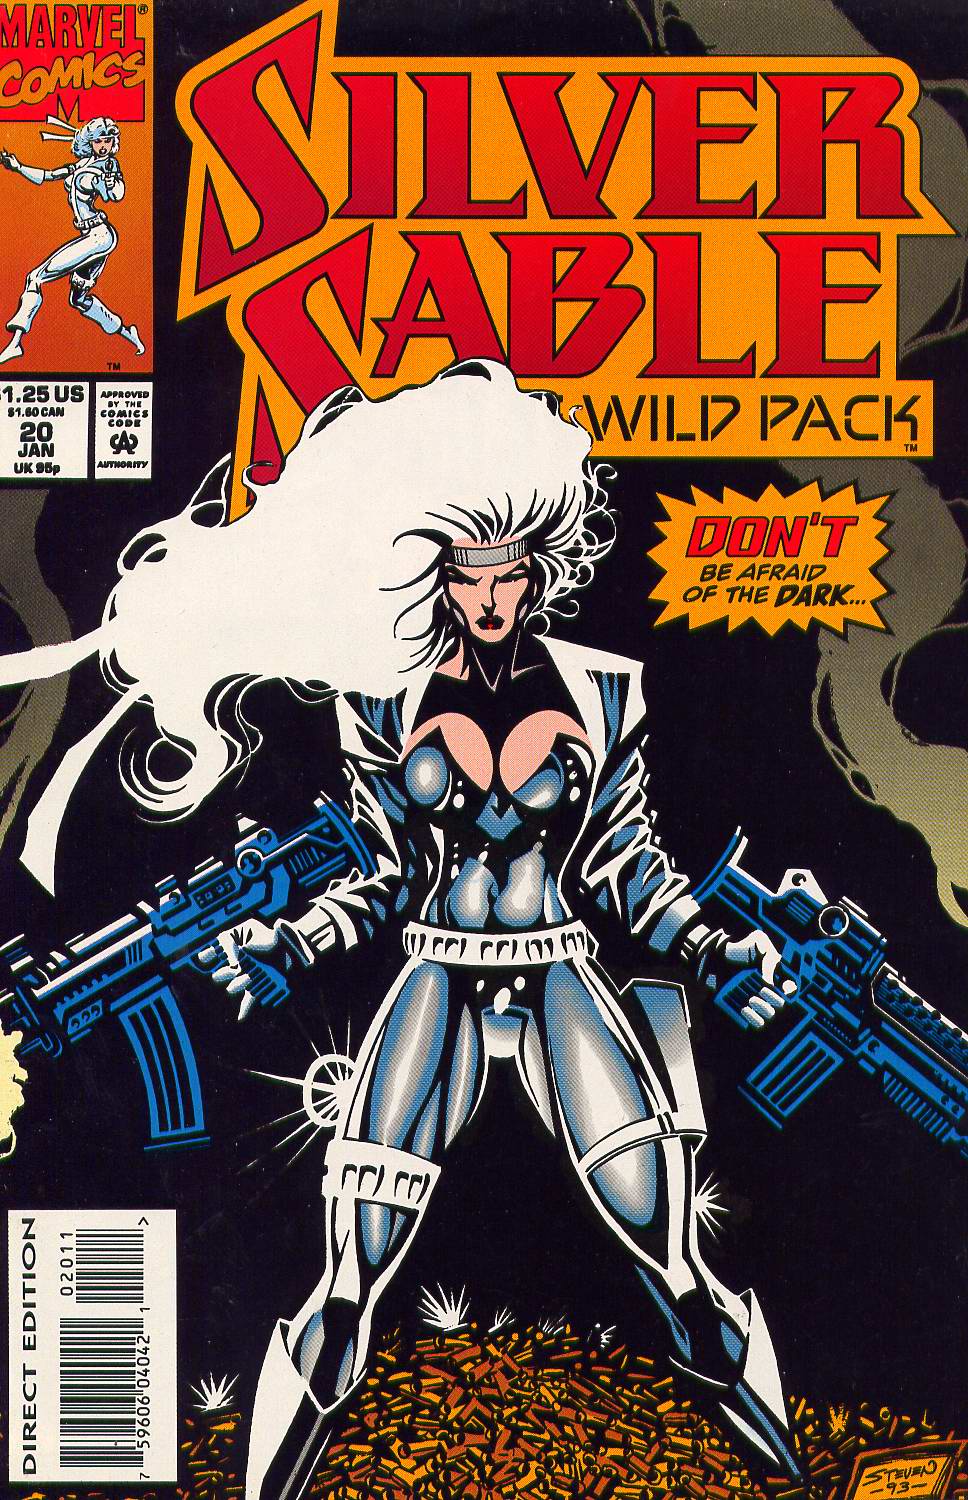 Read online Silver Sable and the Wild Pack comic -  Issue #20 - 1